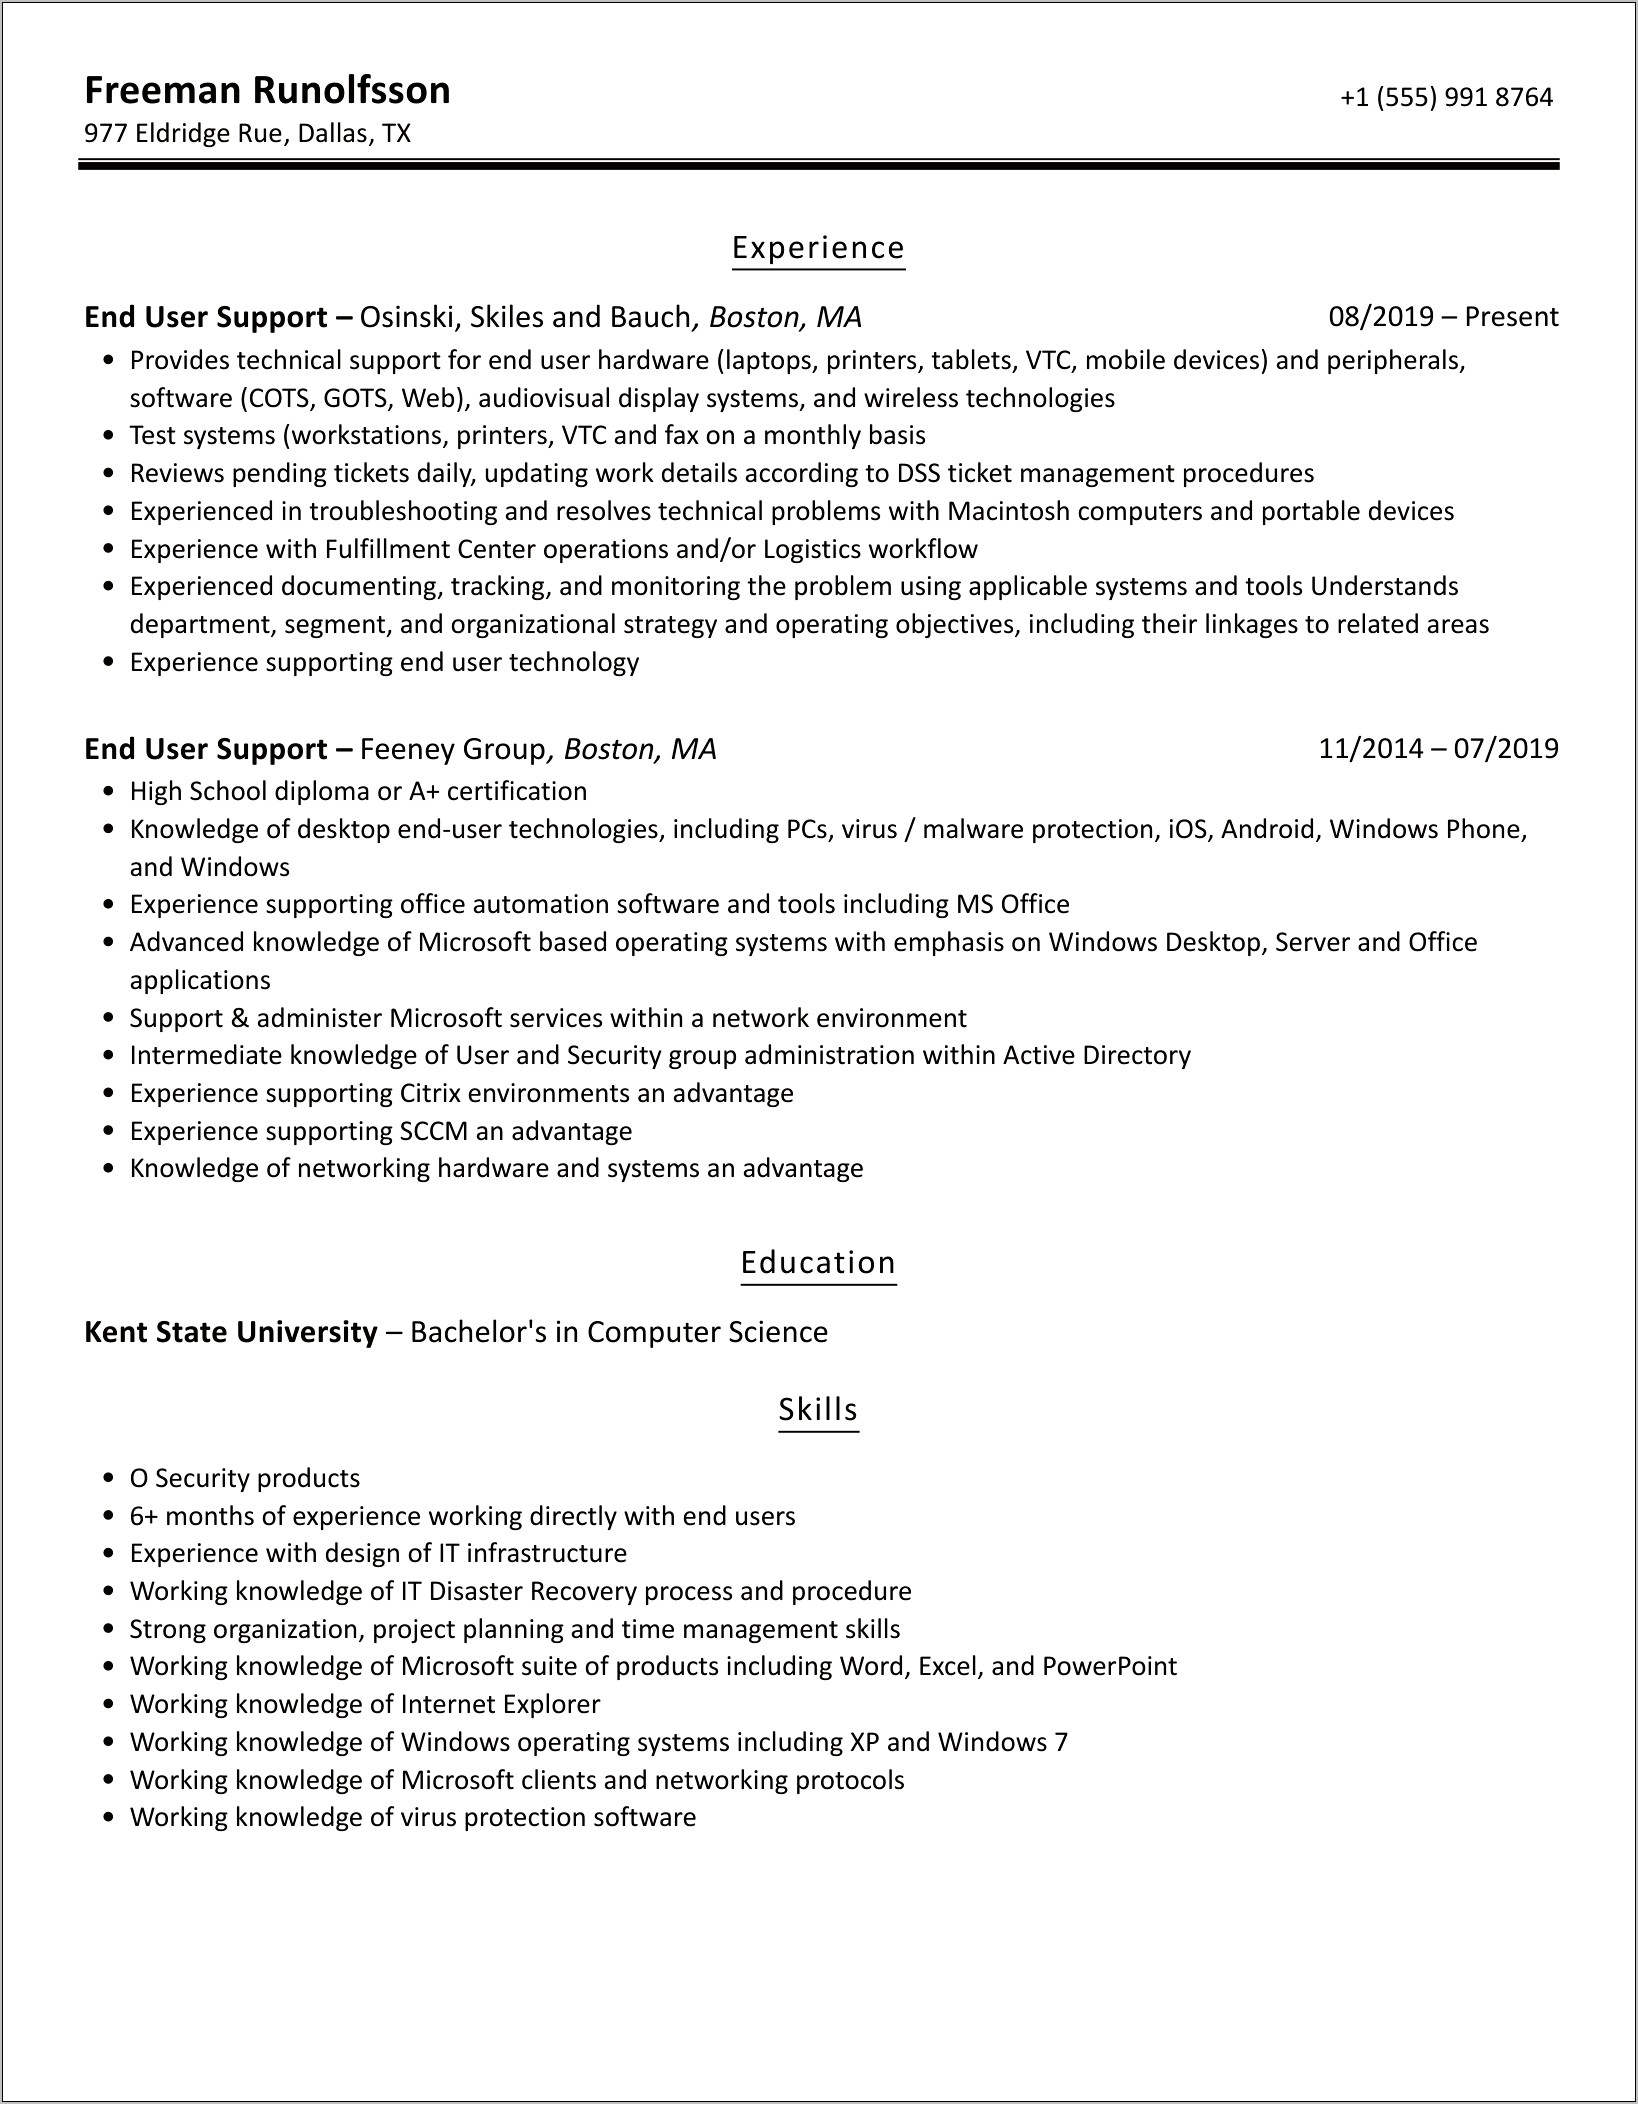 End User Support Resume Example